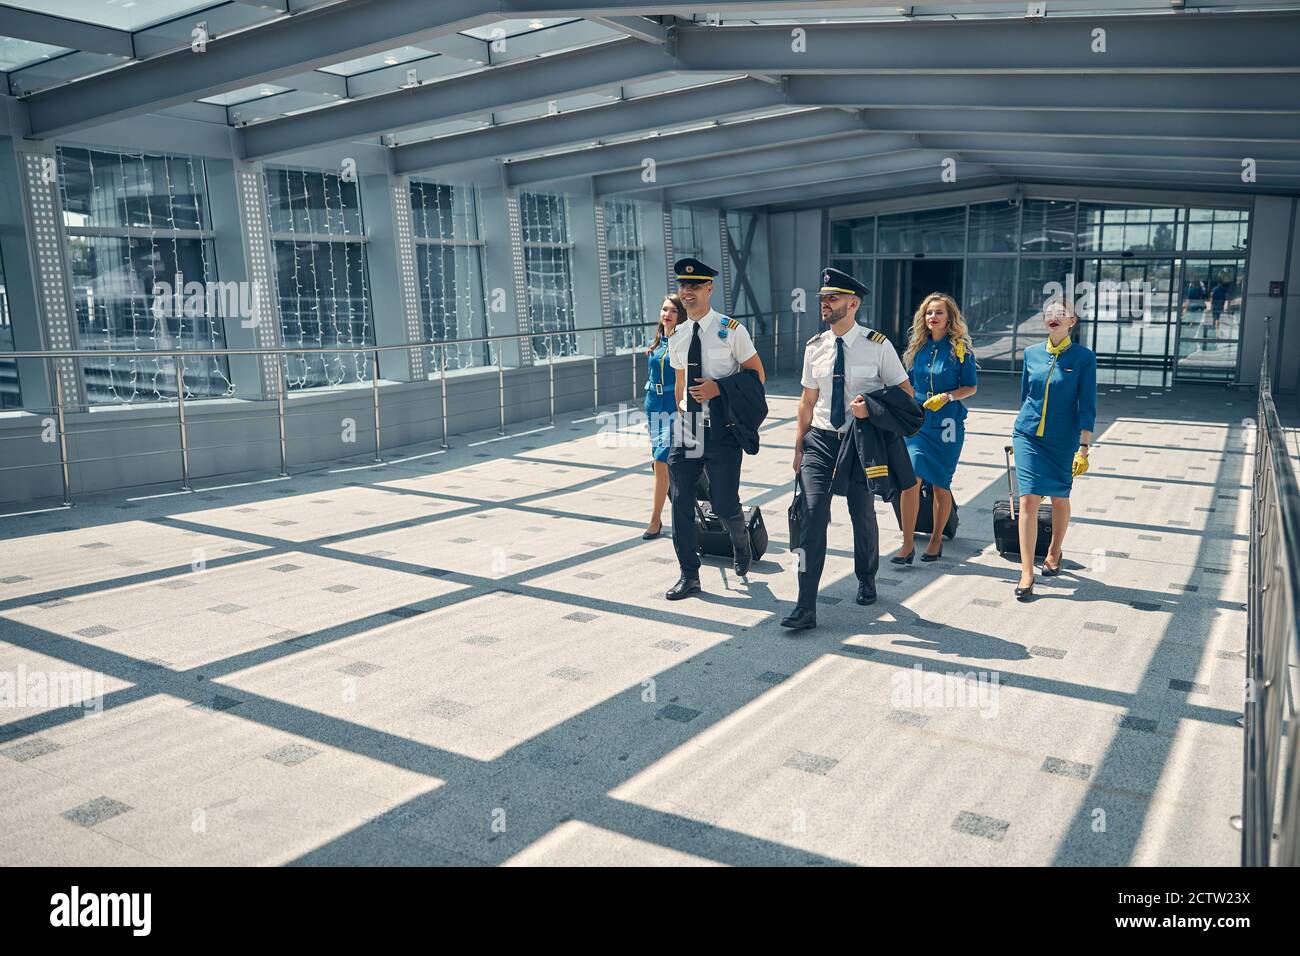 Airline workers with travel suitcases walking in airport terminal Stock Photo